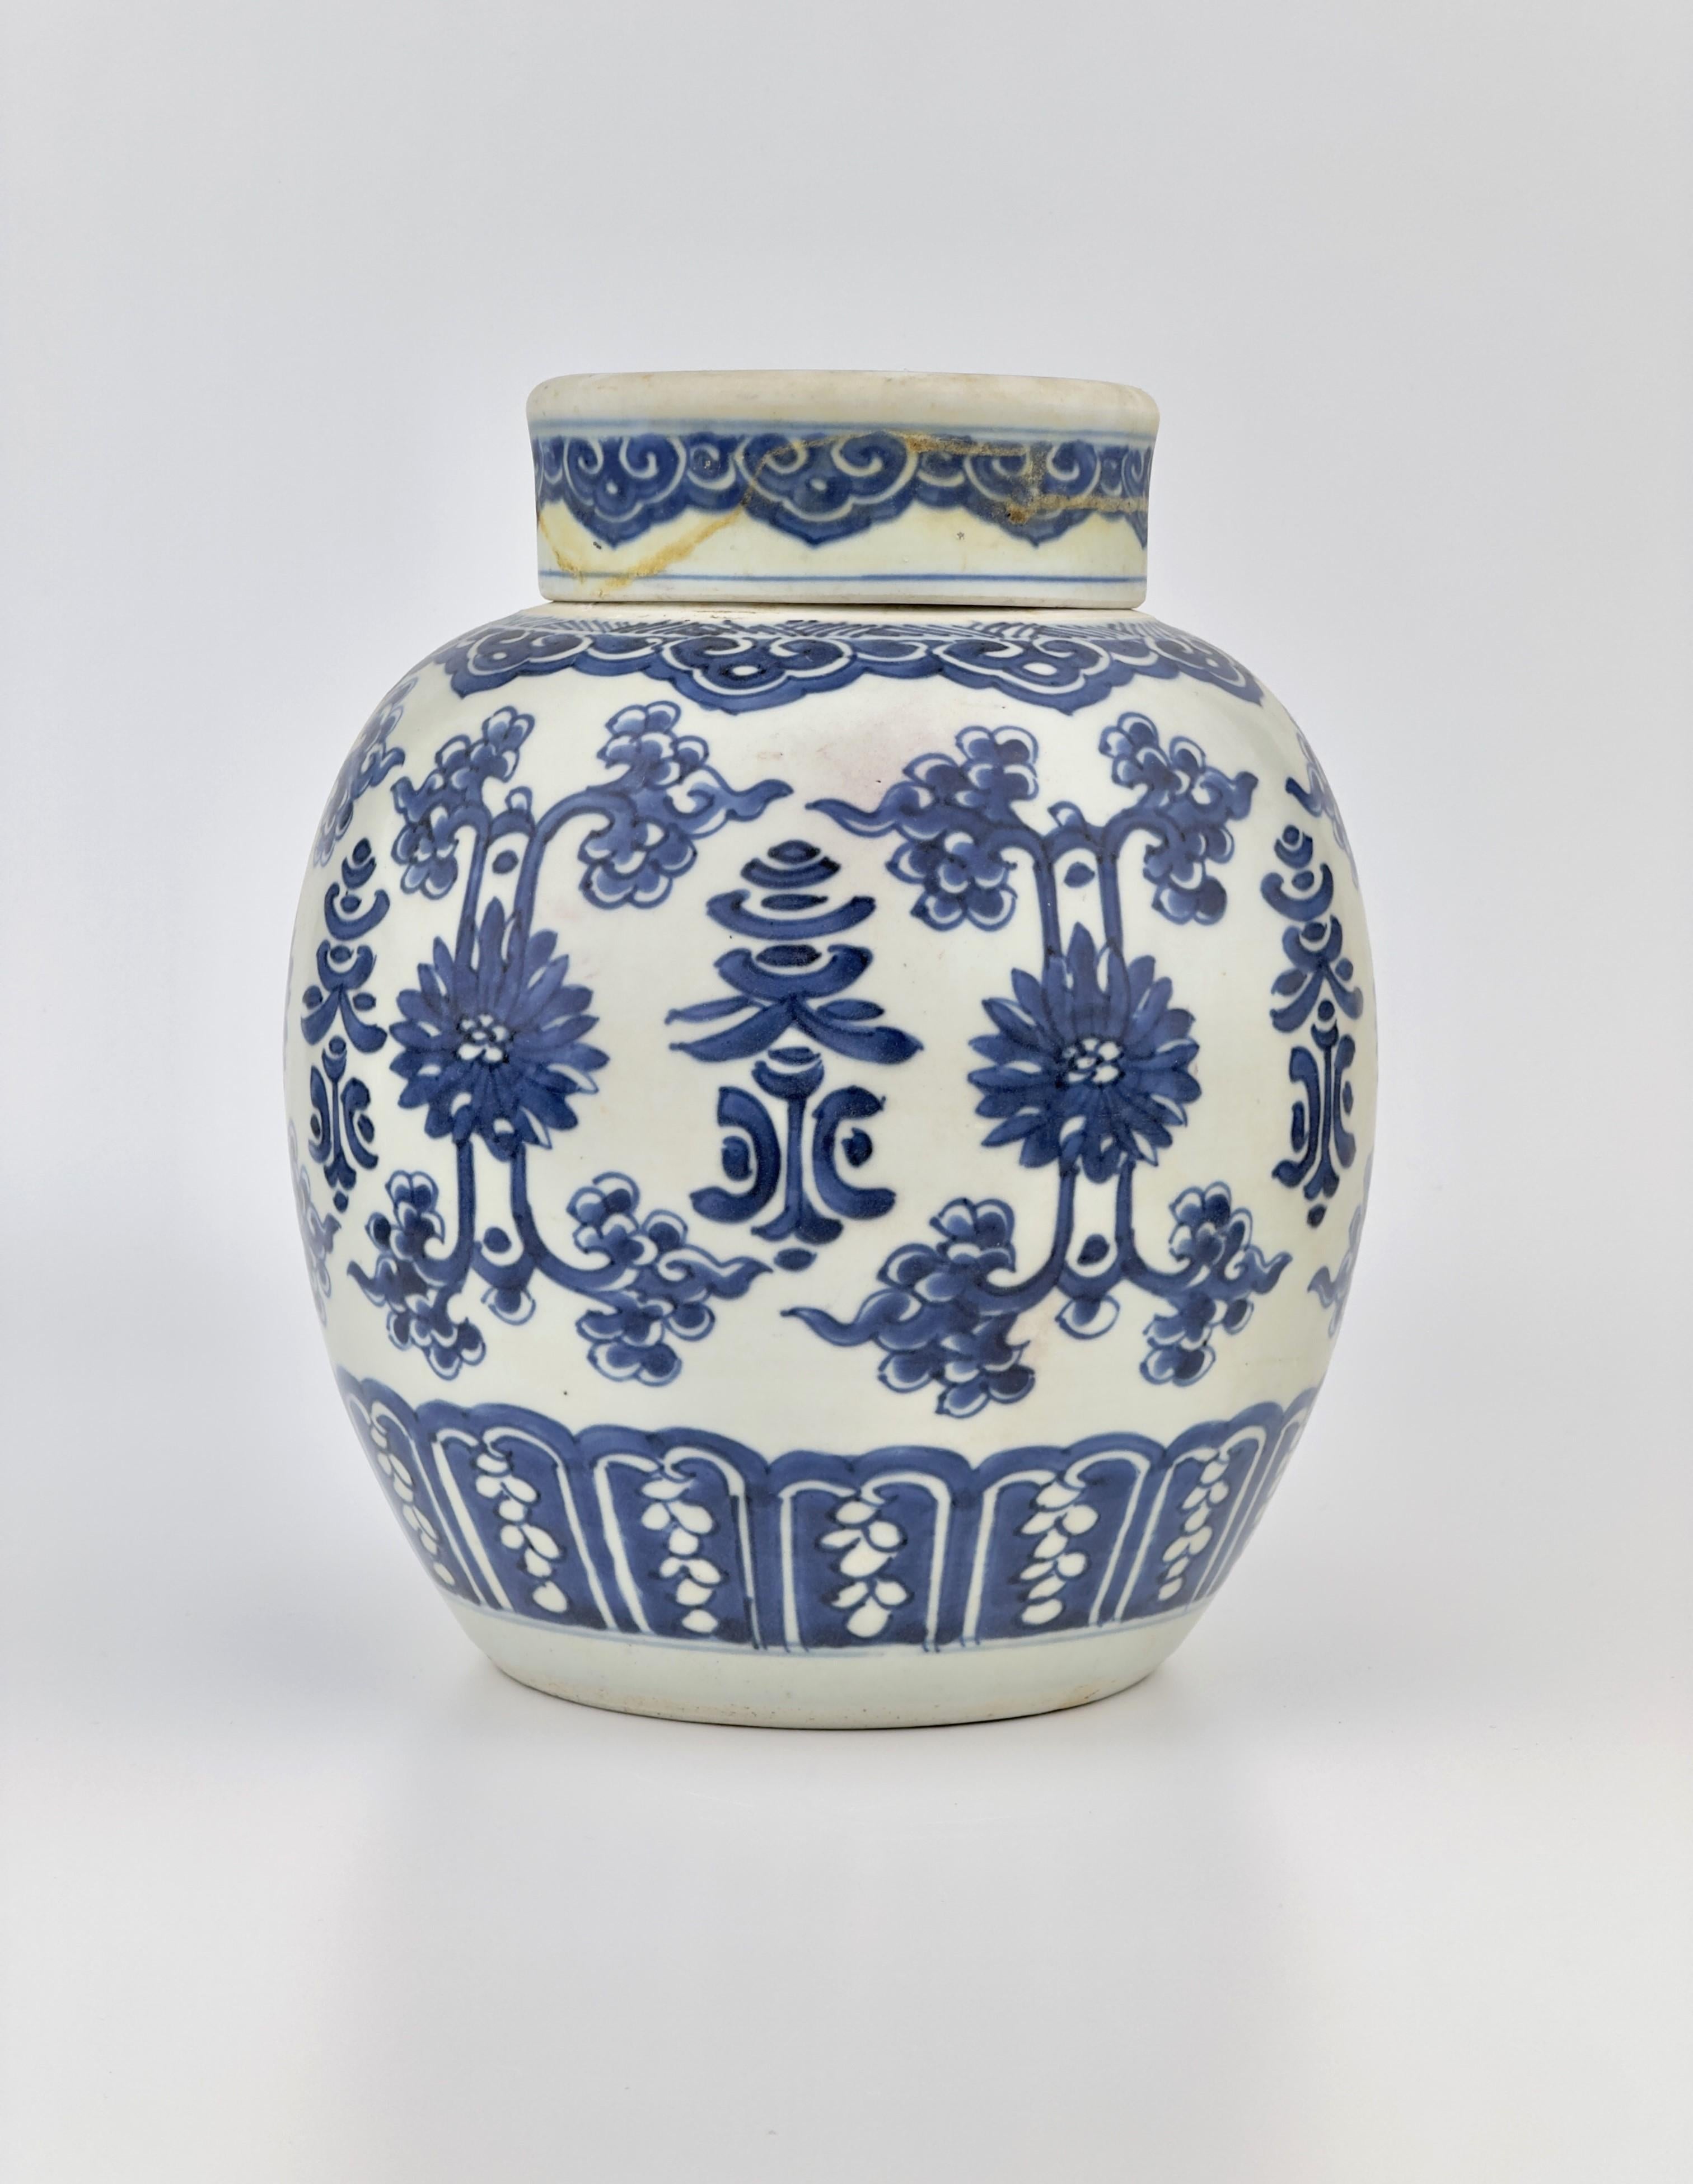 A Chinese porcelain ginger jar, Yongzheng period, painted in underglaze blue with lotus blooms and shou(水, meaning 'Water') characters beneath a ruyi border, underglaze blue double ring mark to base

Period : Qing Dynasty, Yongzheng